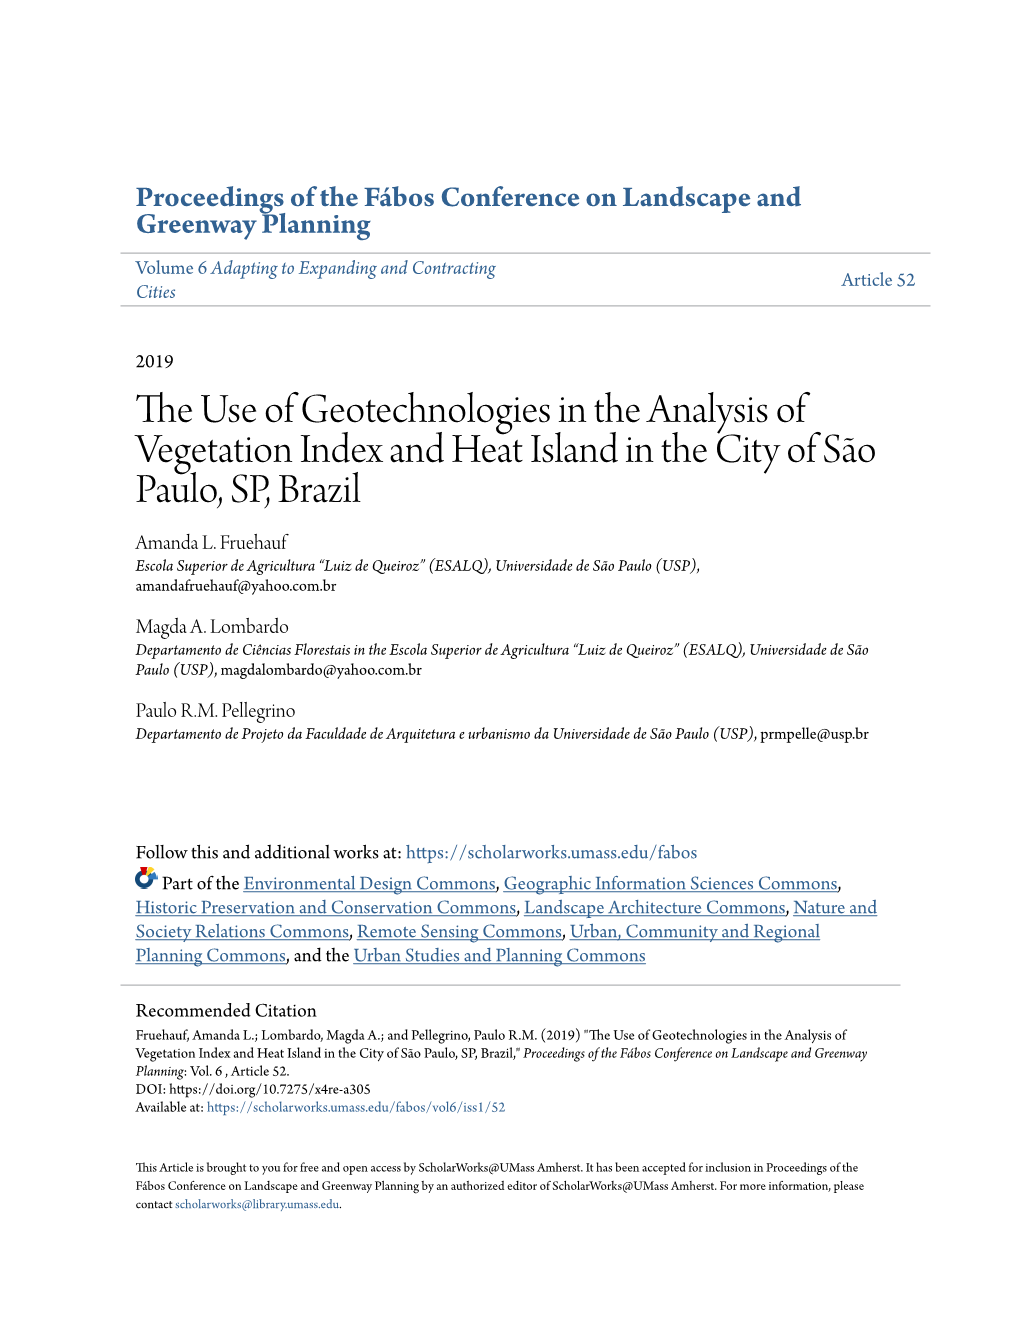 The Use of Geotechnologies in the Analysis of Vegetation Index and Heat Island in the City of São Paulo, SP, Brazil